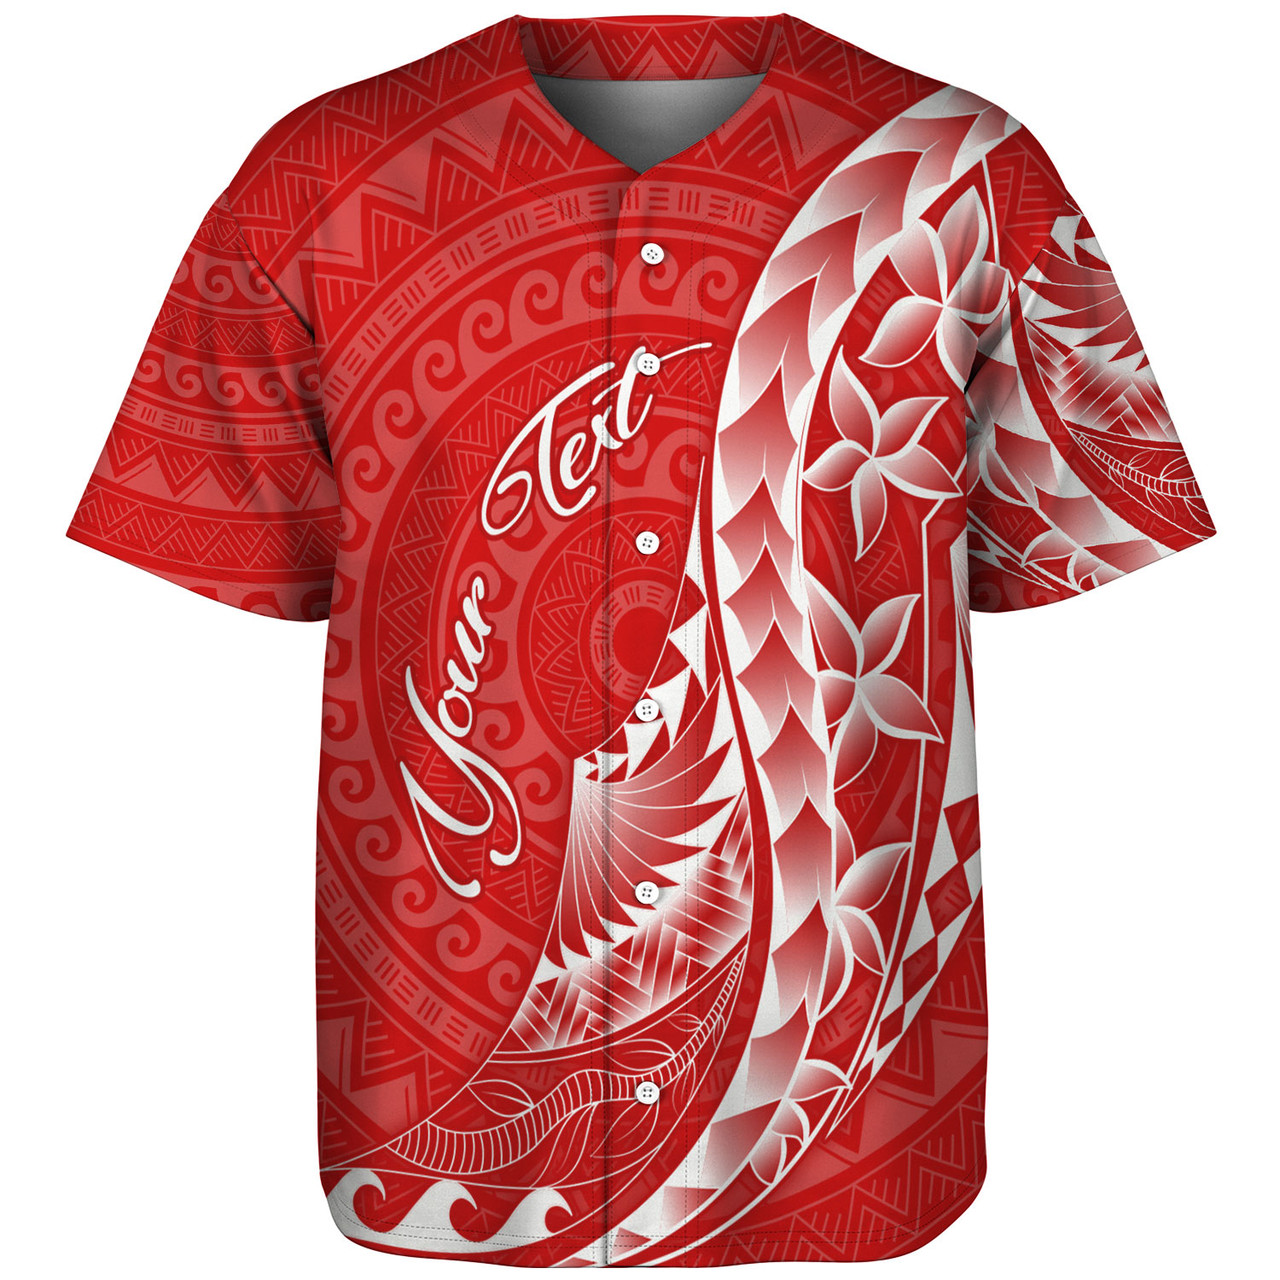 French Polynesia Custom Personalised Baseball Shirt Coat Of Arms Tribal Patterns Style